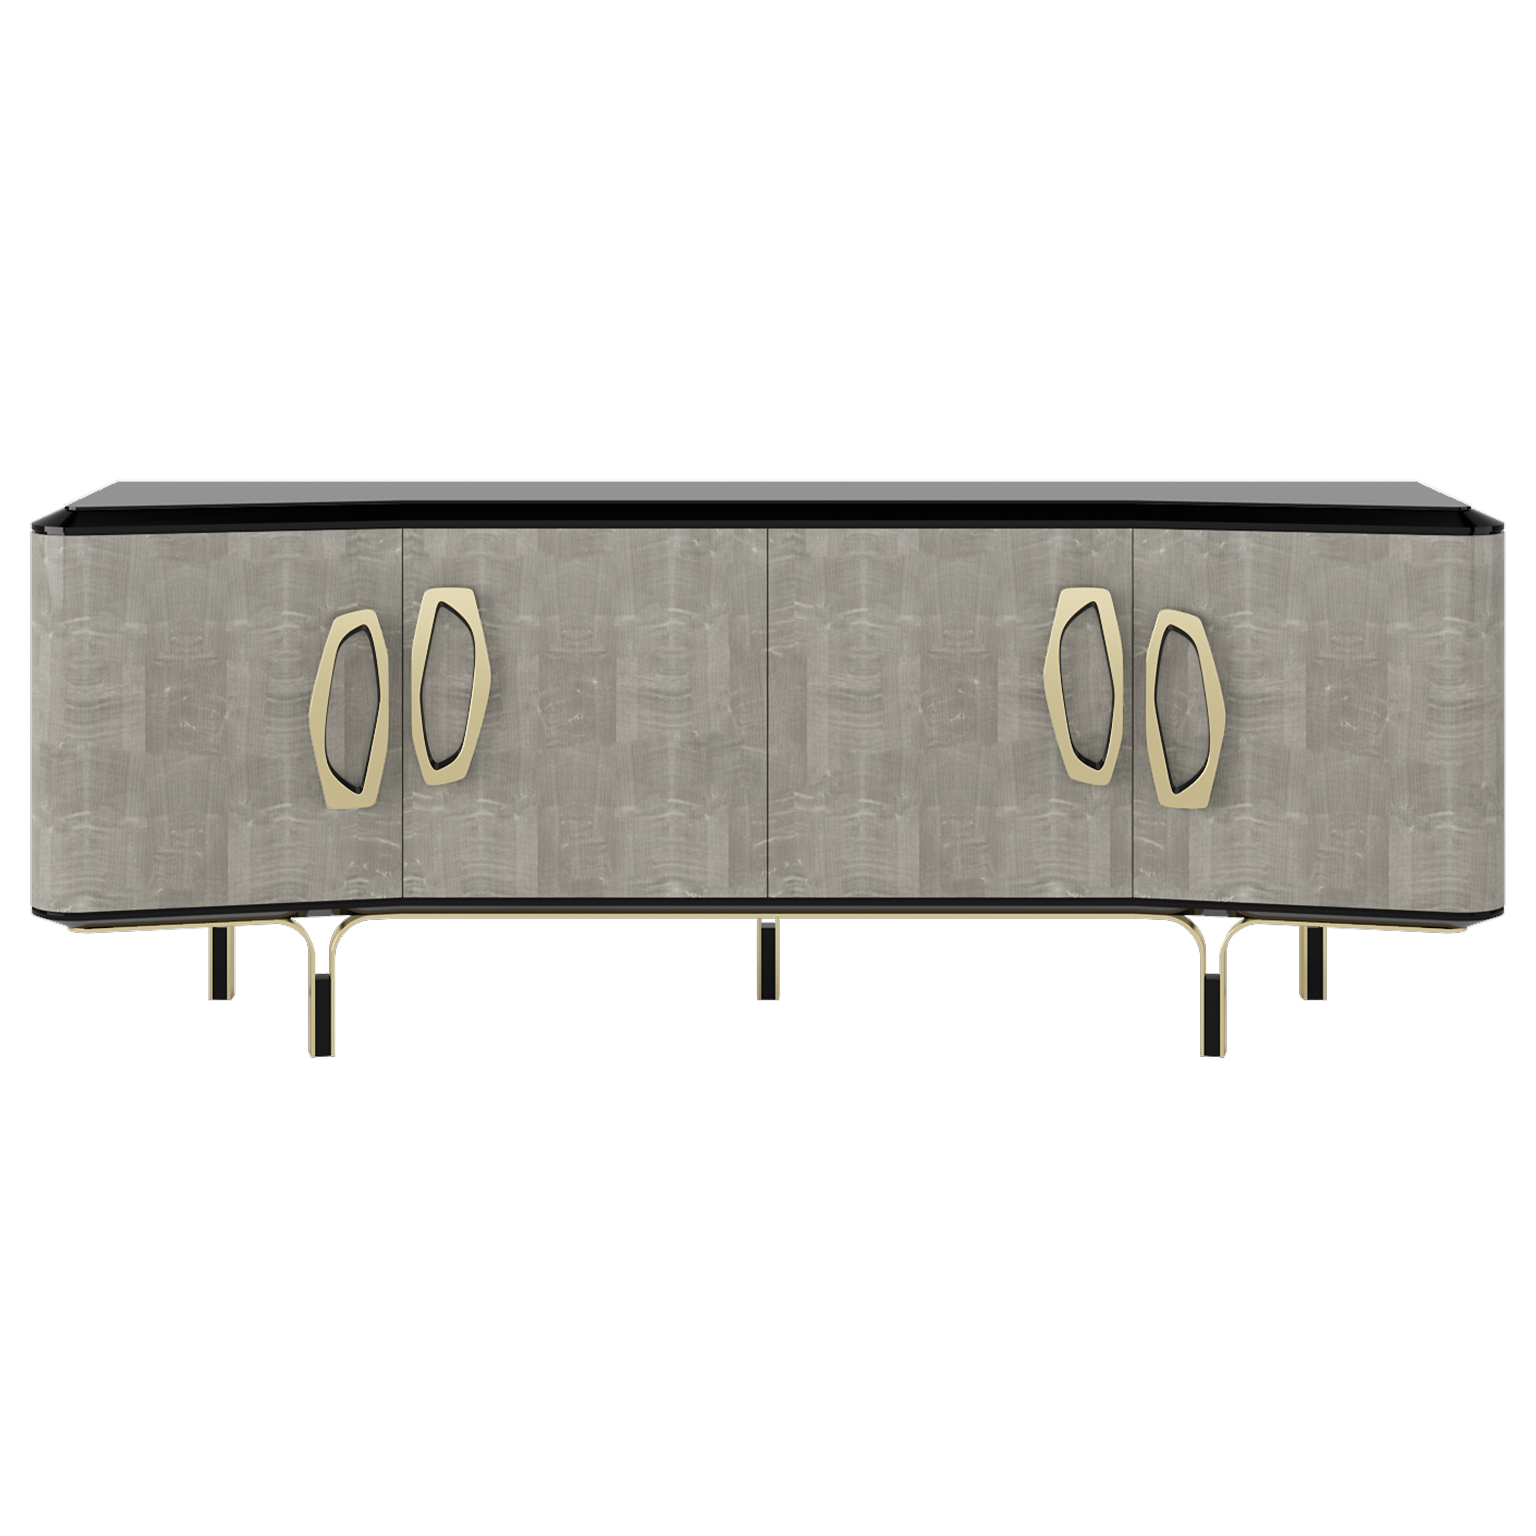 Sideboard with grey sycamore body, black lacquer top and base, smoked brass hardware, apron and legs.